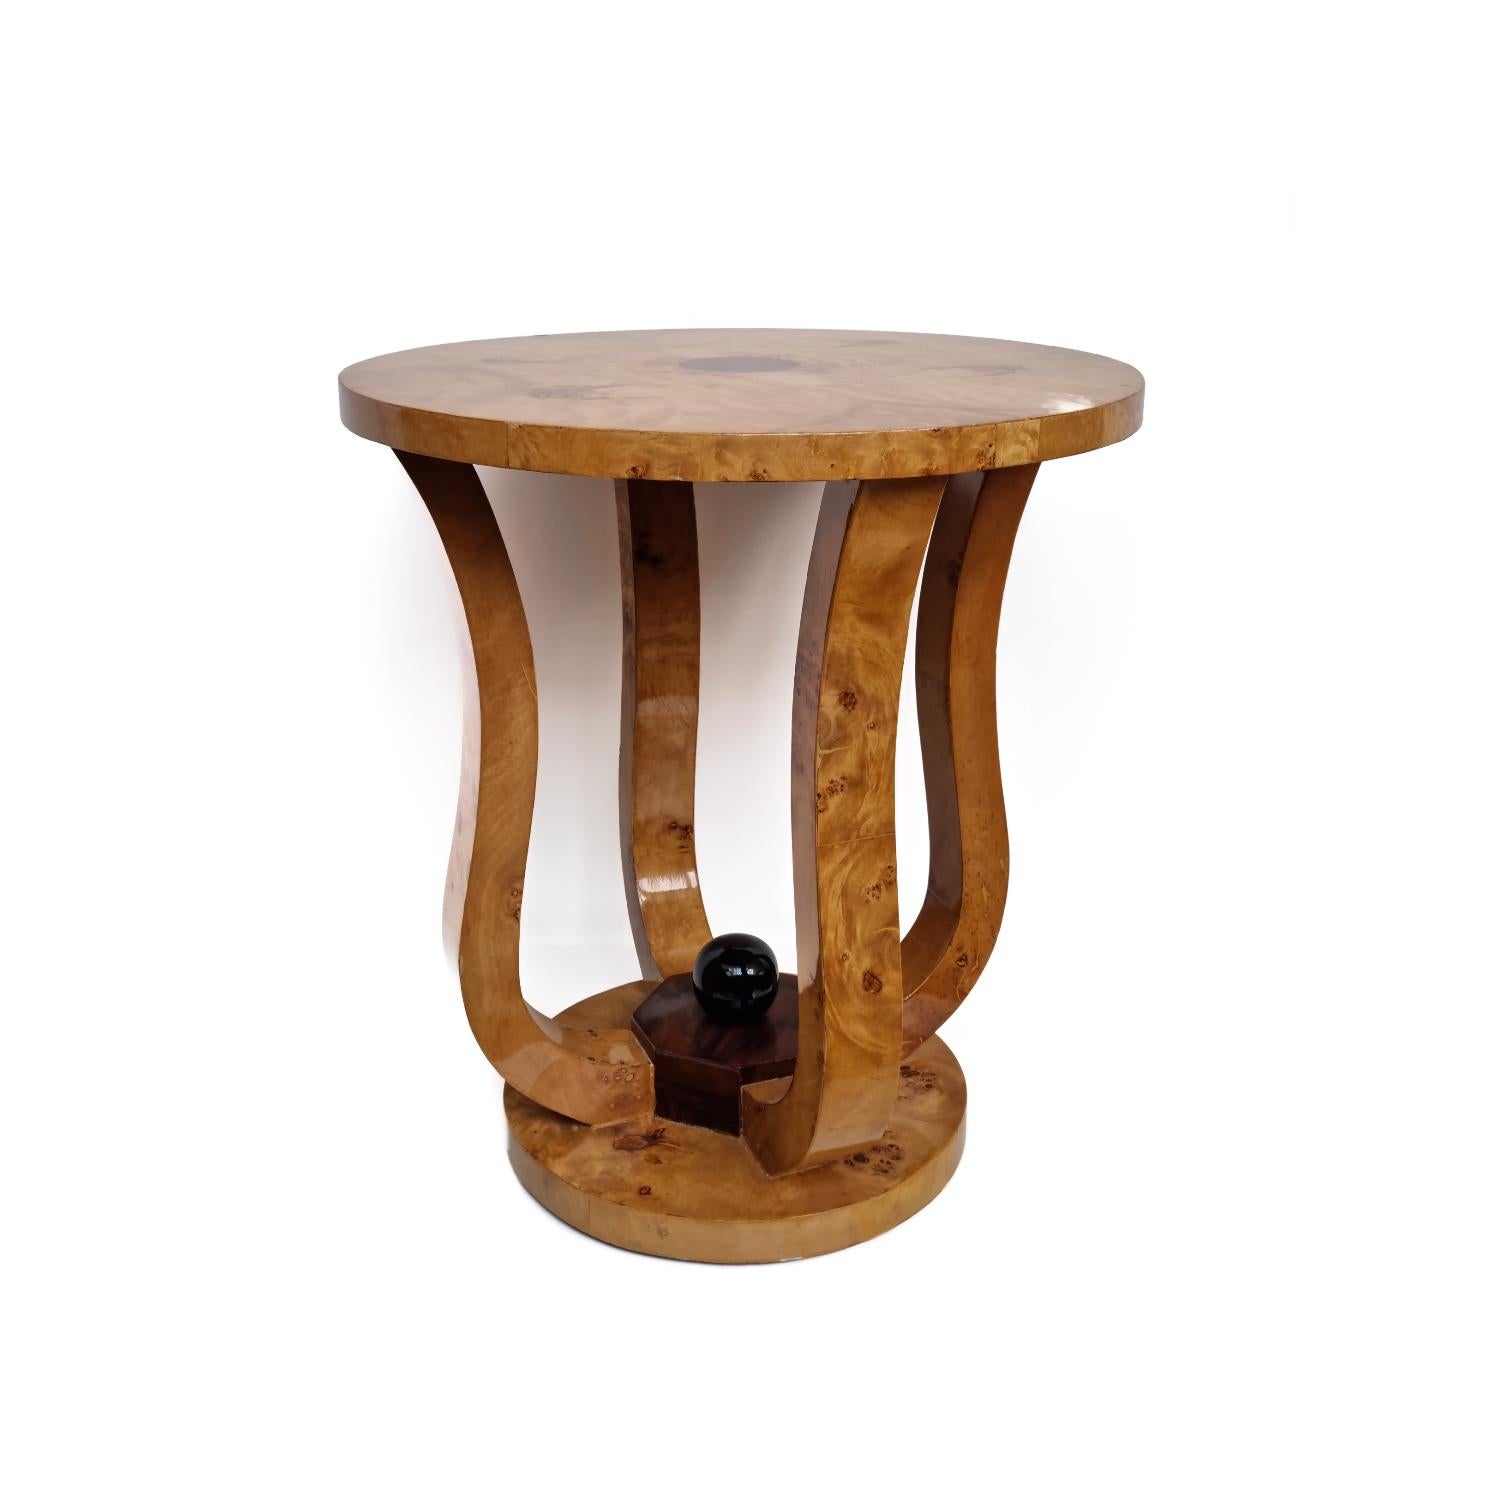 20th Century Art Deco Style Burl Wood Side Table For Sale